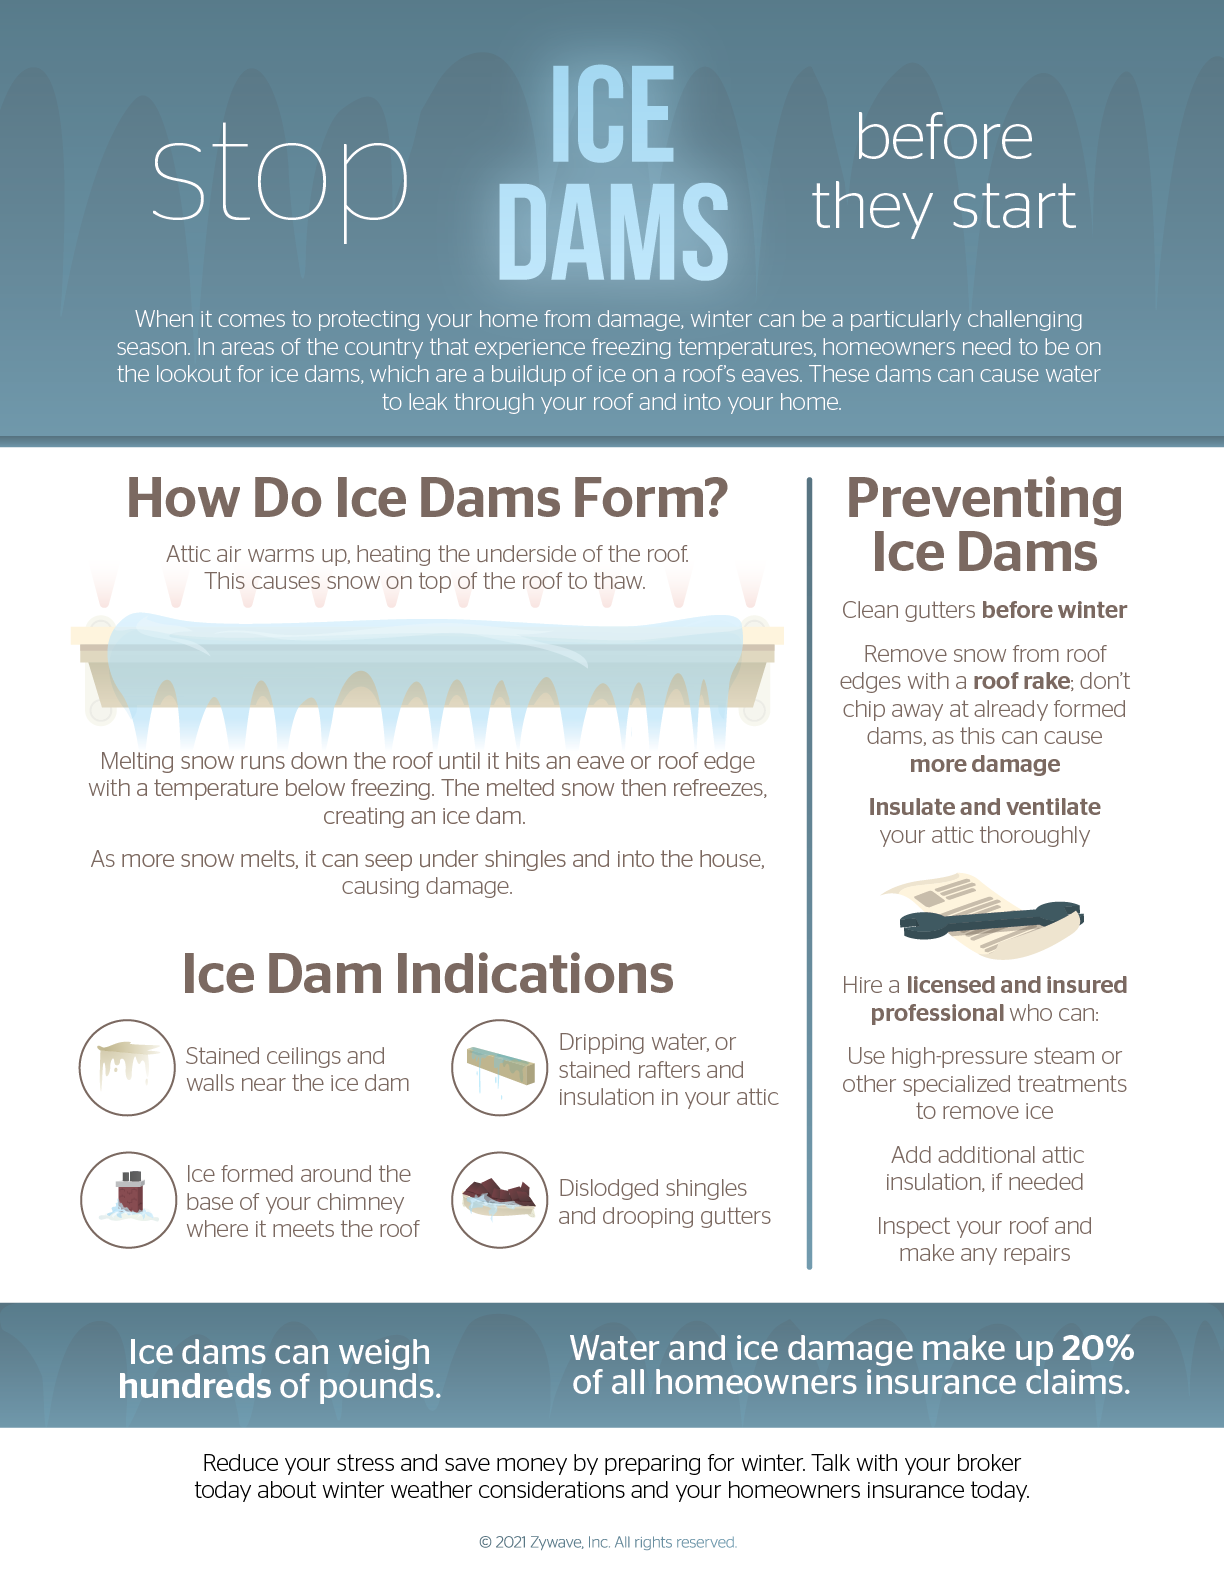 An infographic about preventing ice dams. The content is transcribed below this image.